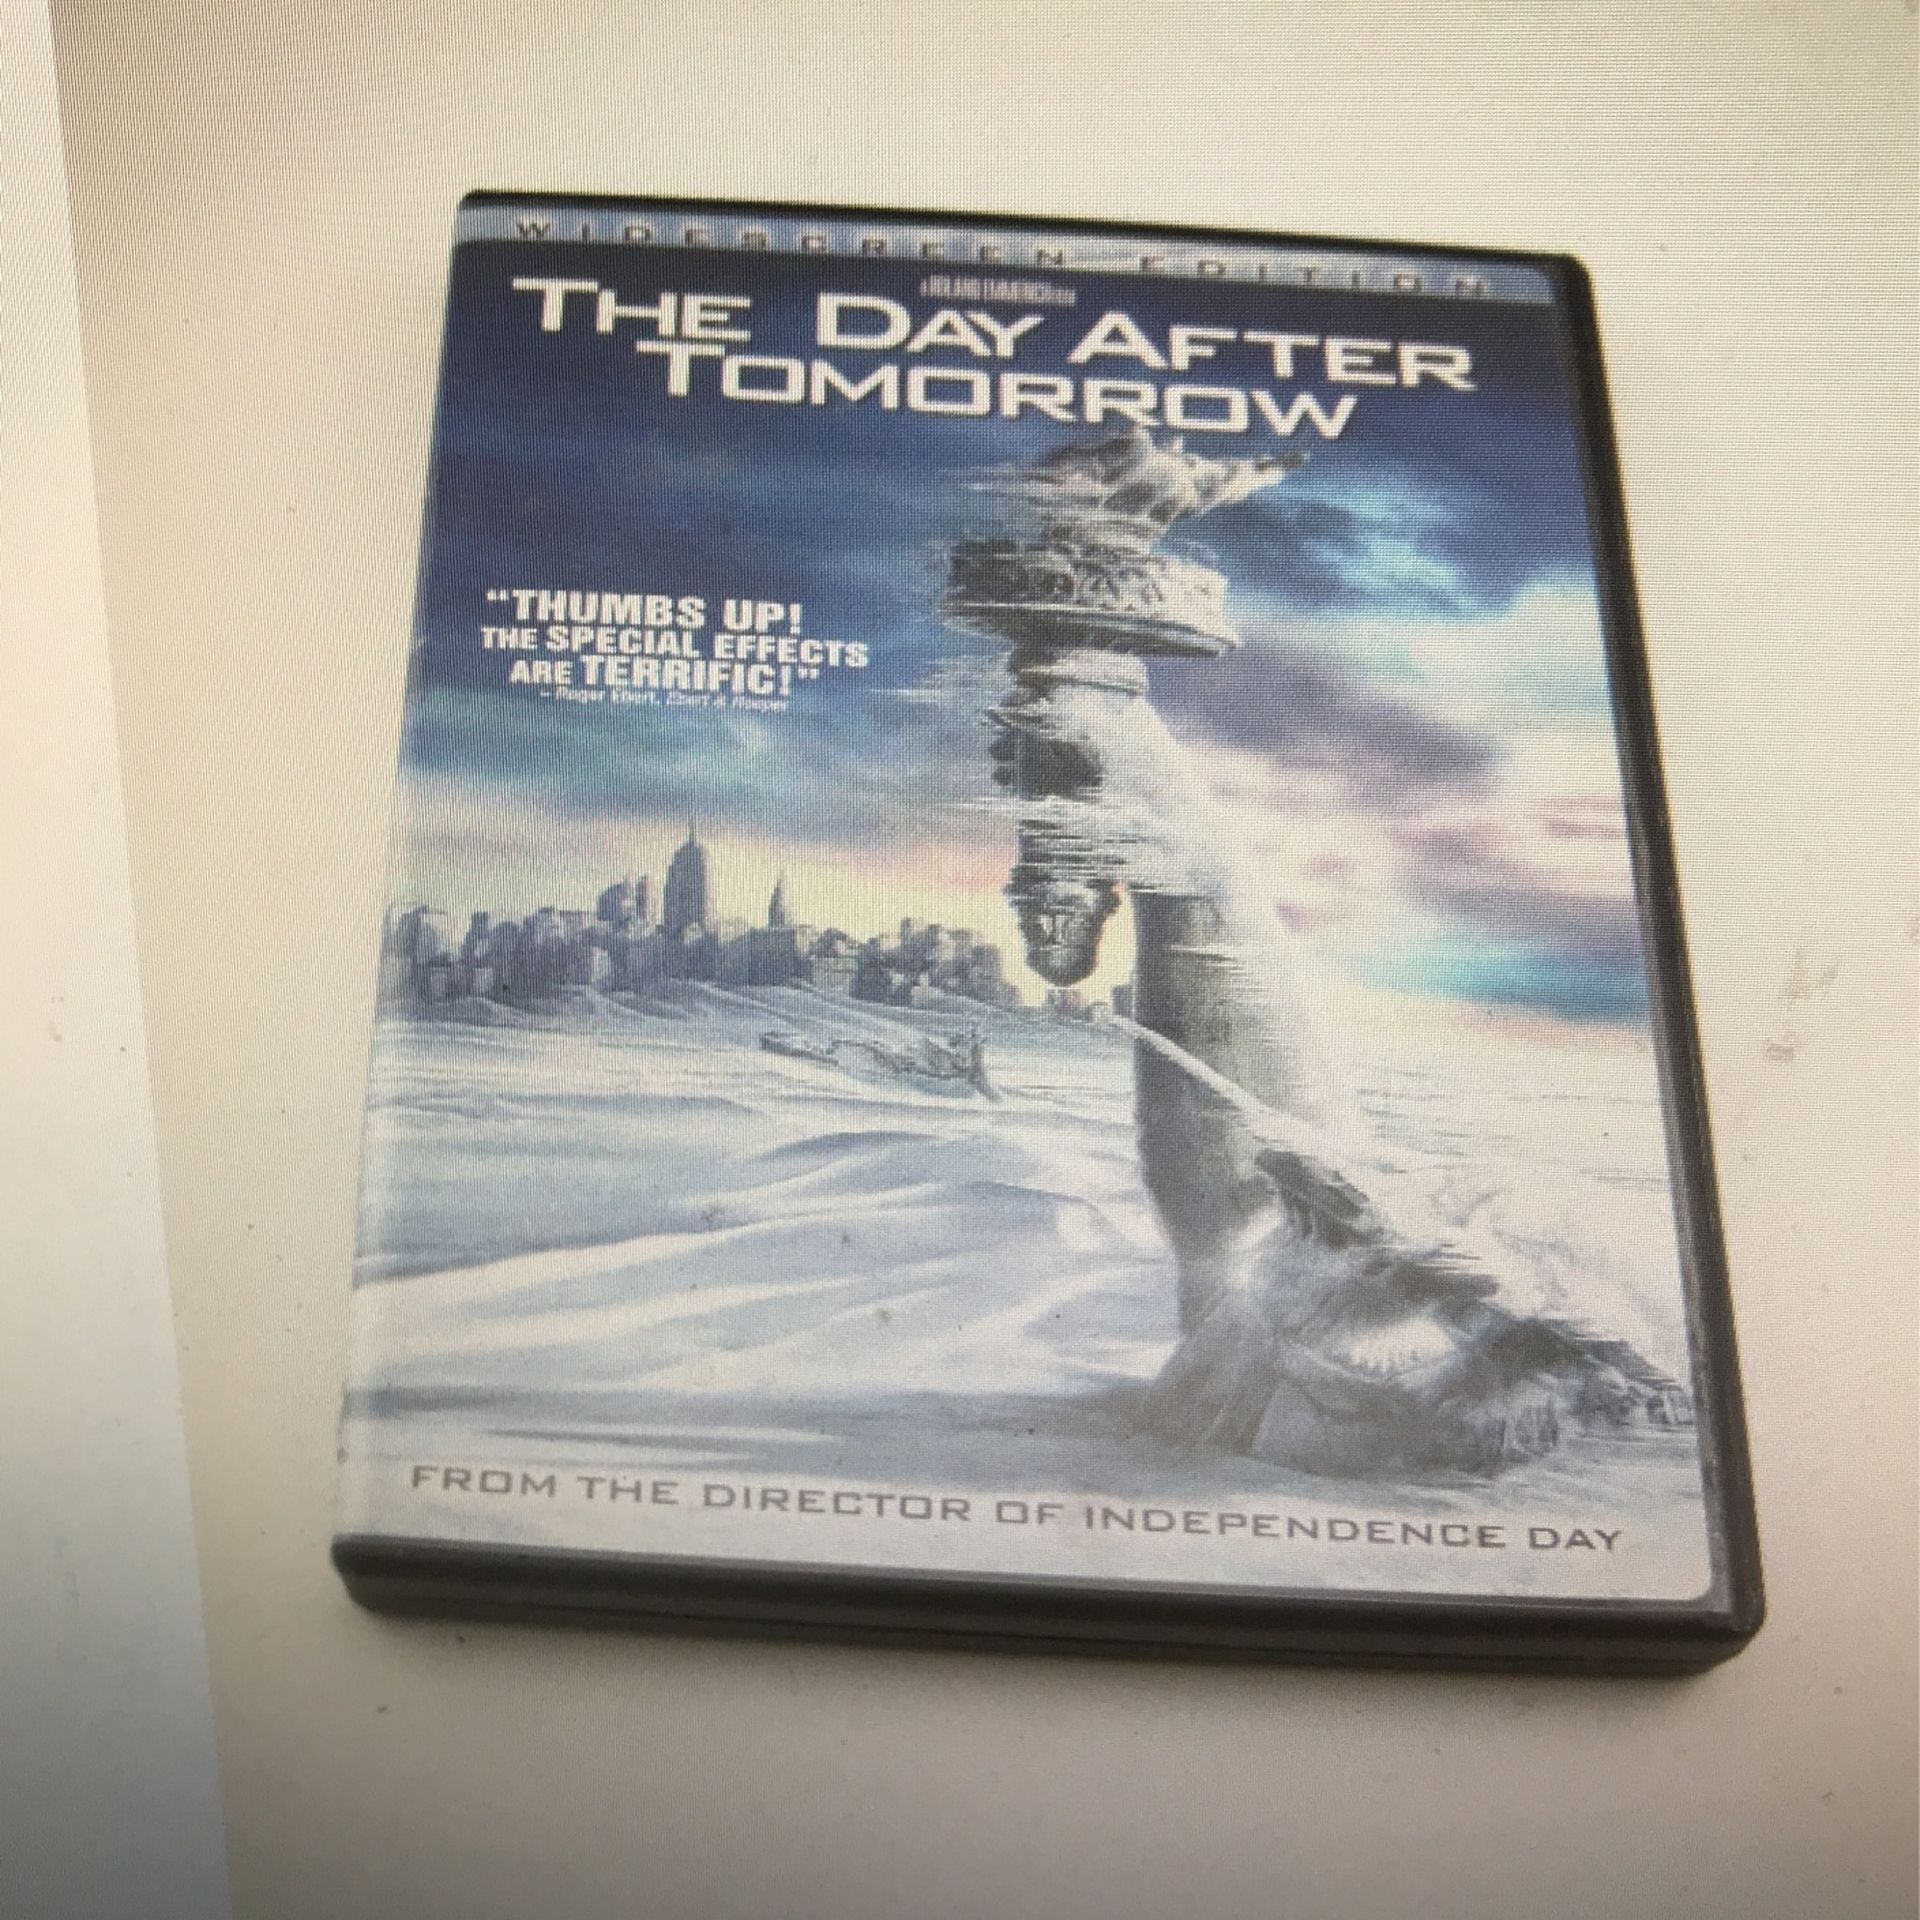 The Day After Tomorrow (DVD Movie) (widescreen edition) (Roland Emmerich) (2004)